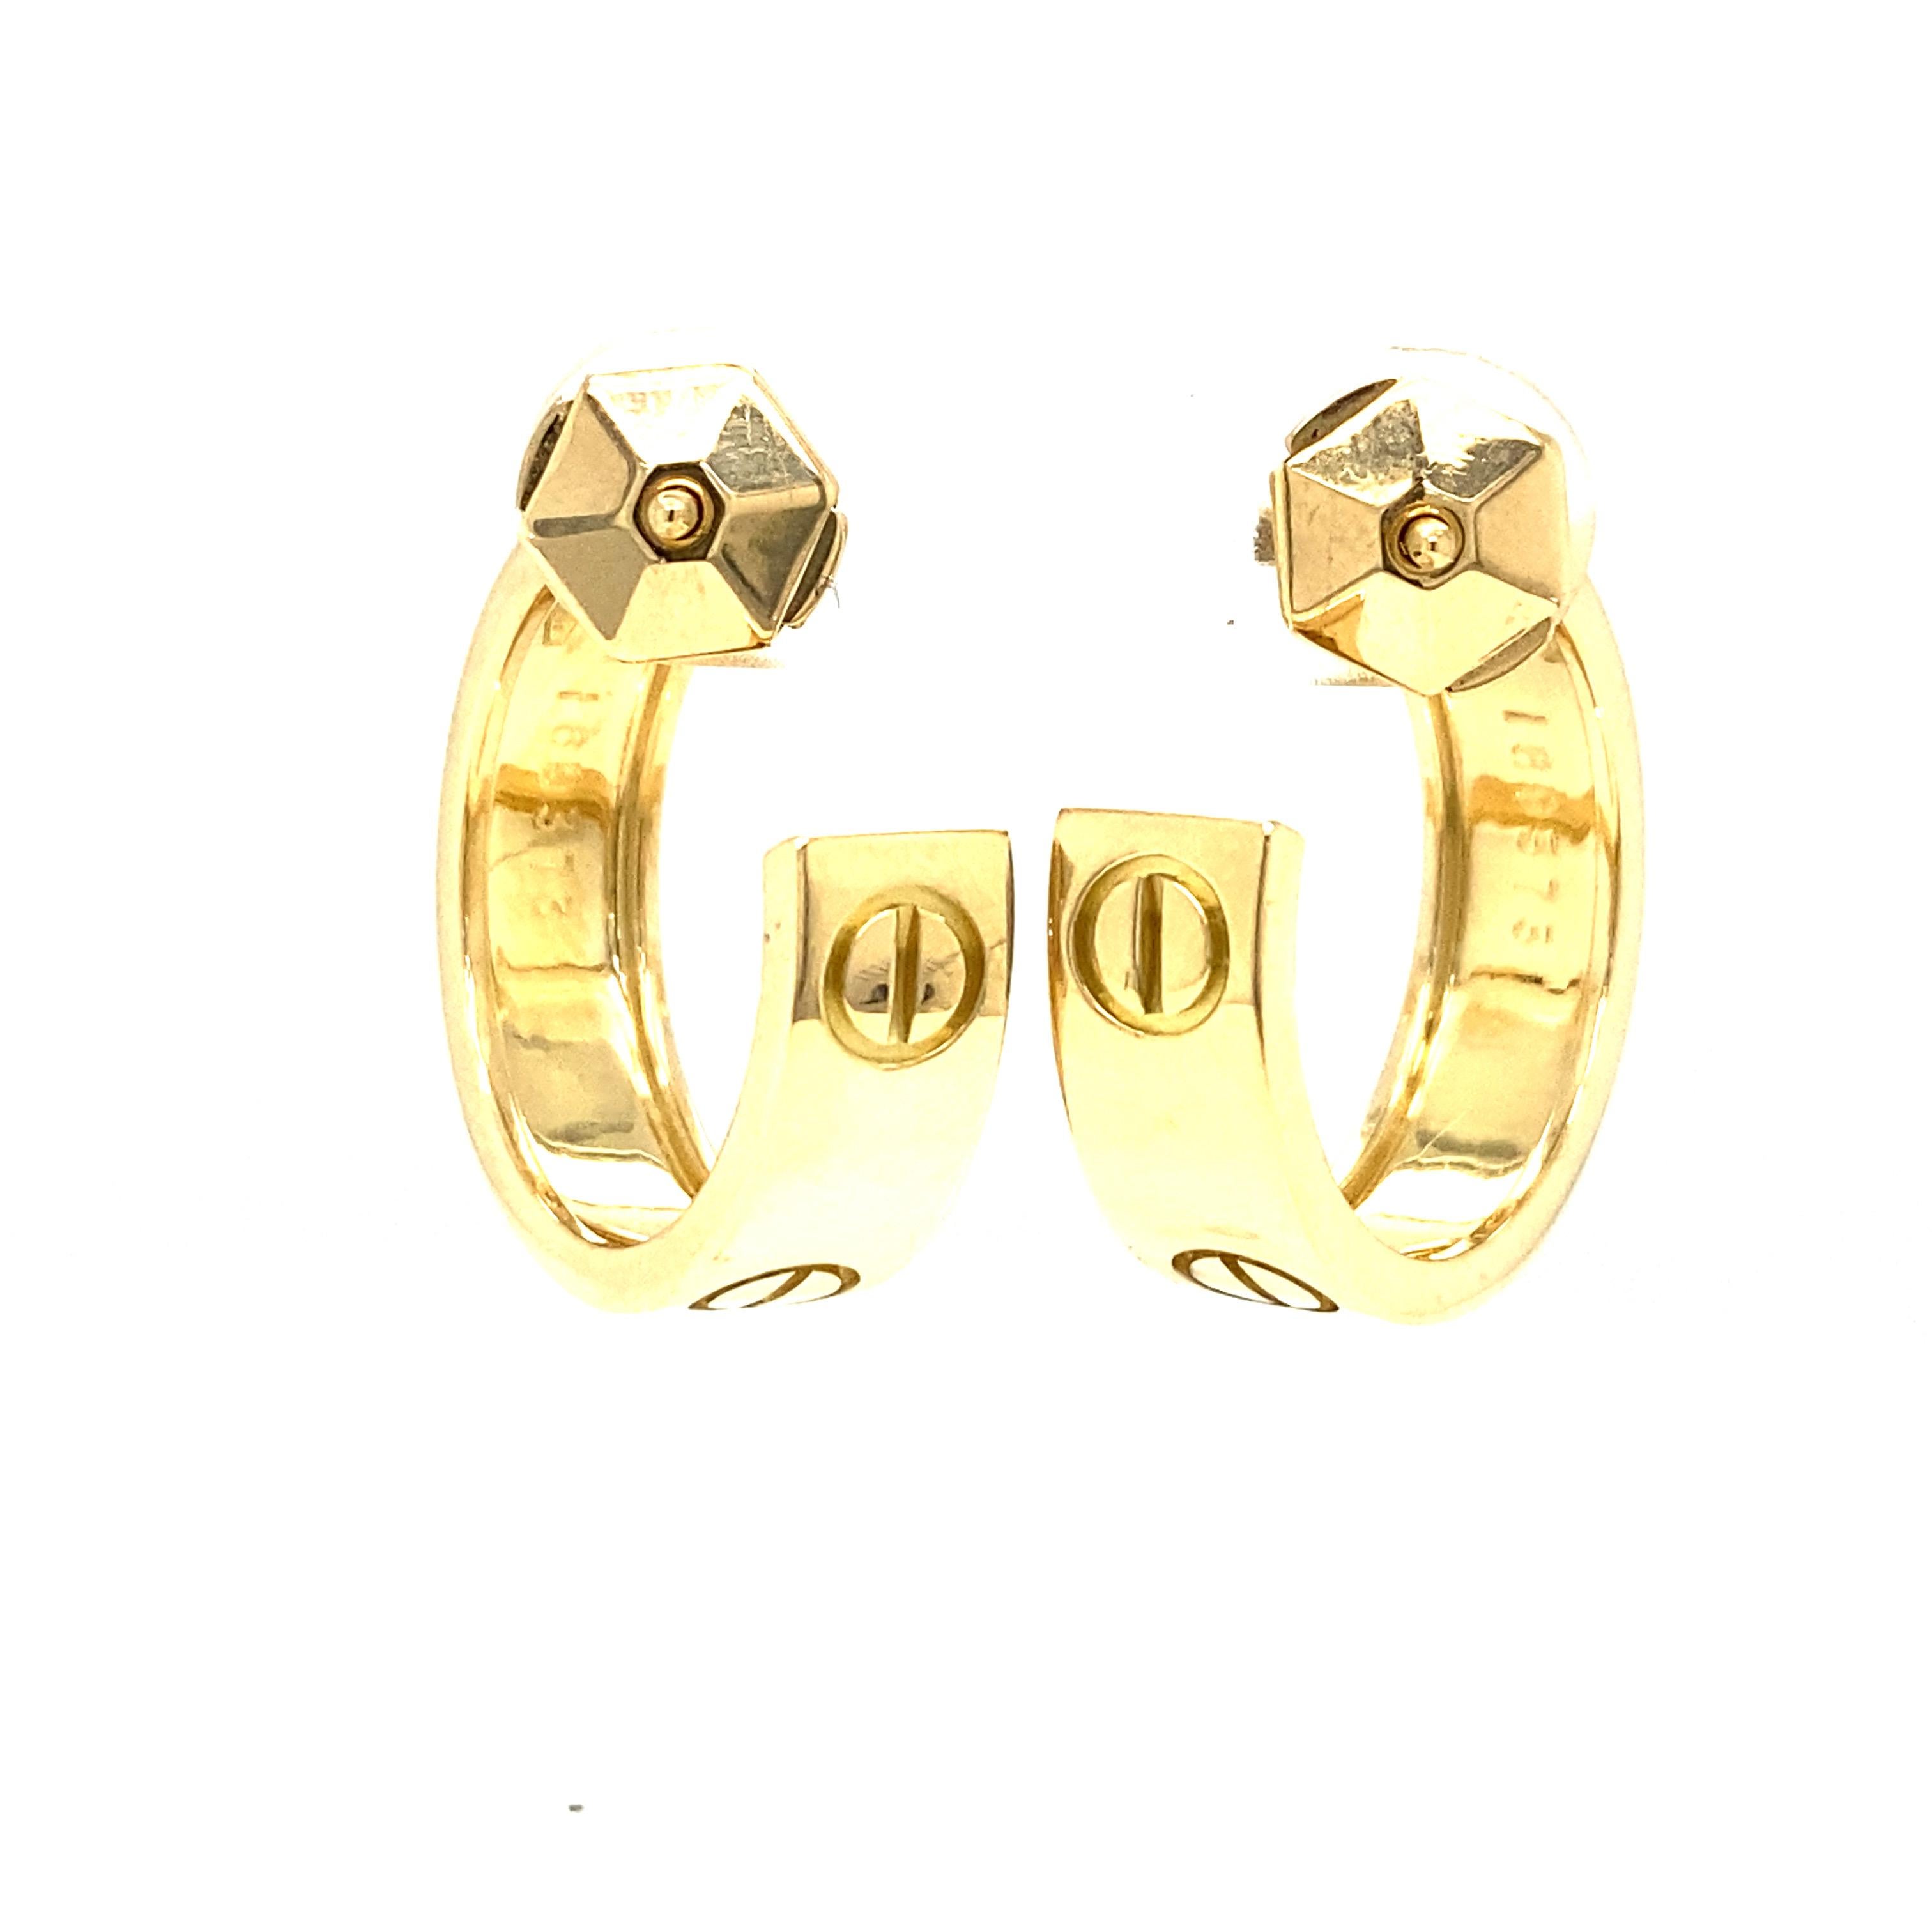 Cartier 18k Love Hoop Earrings Yellow Gold In Good Condition For Sale In Boca Raton, FL